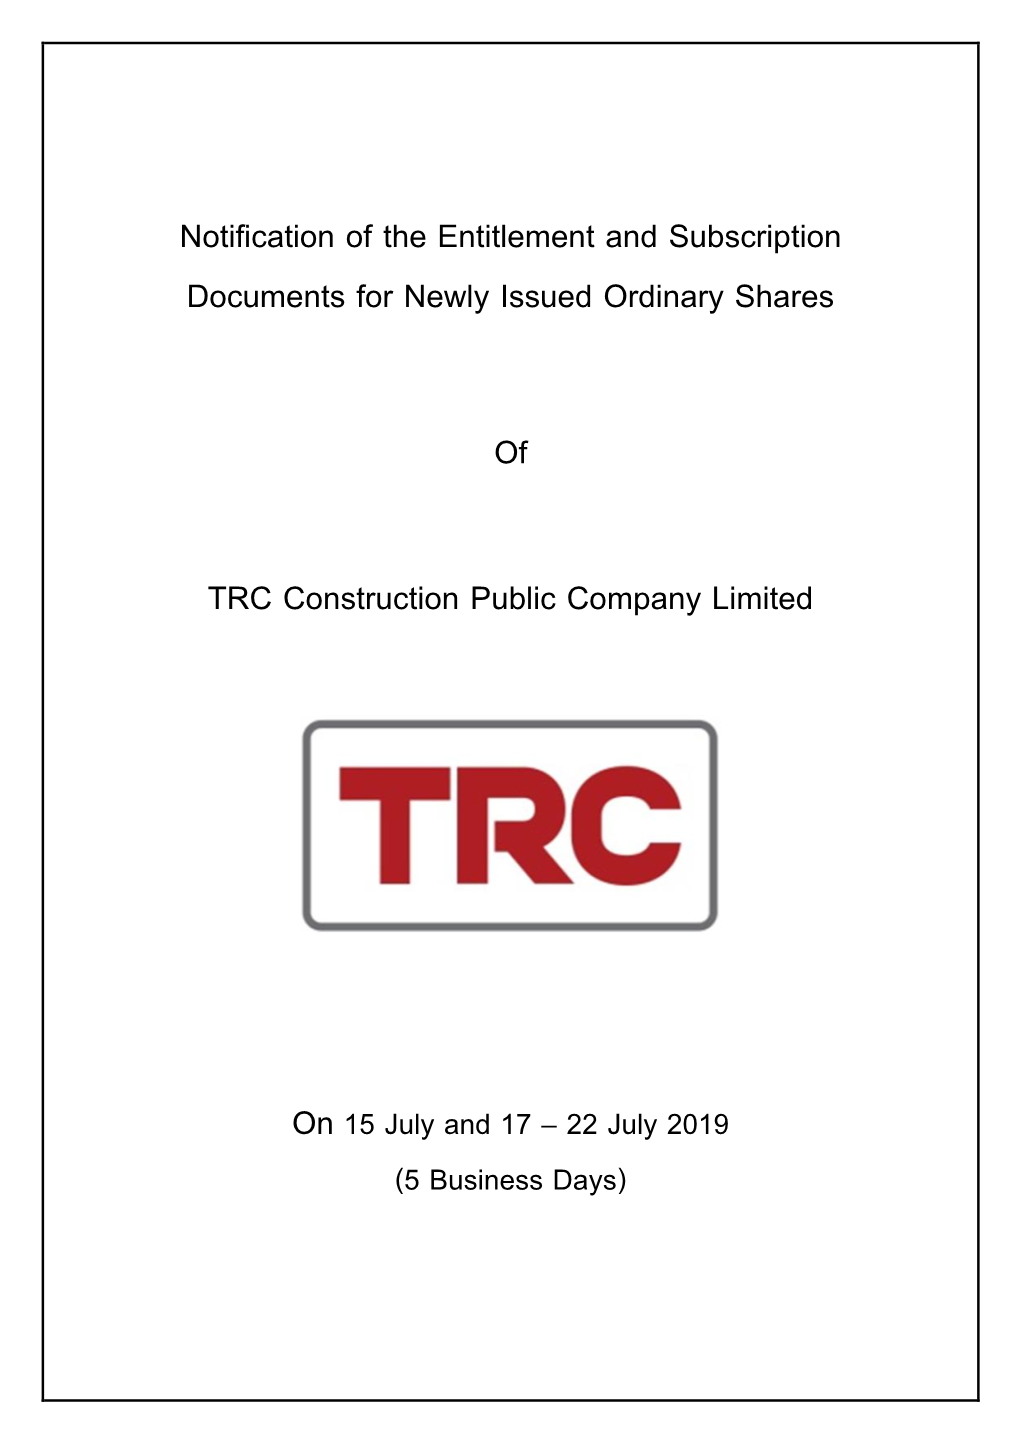 Notification of the Entitlement and Subscription Documents for Newly Issued Ordinary Shares